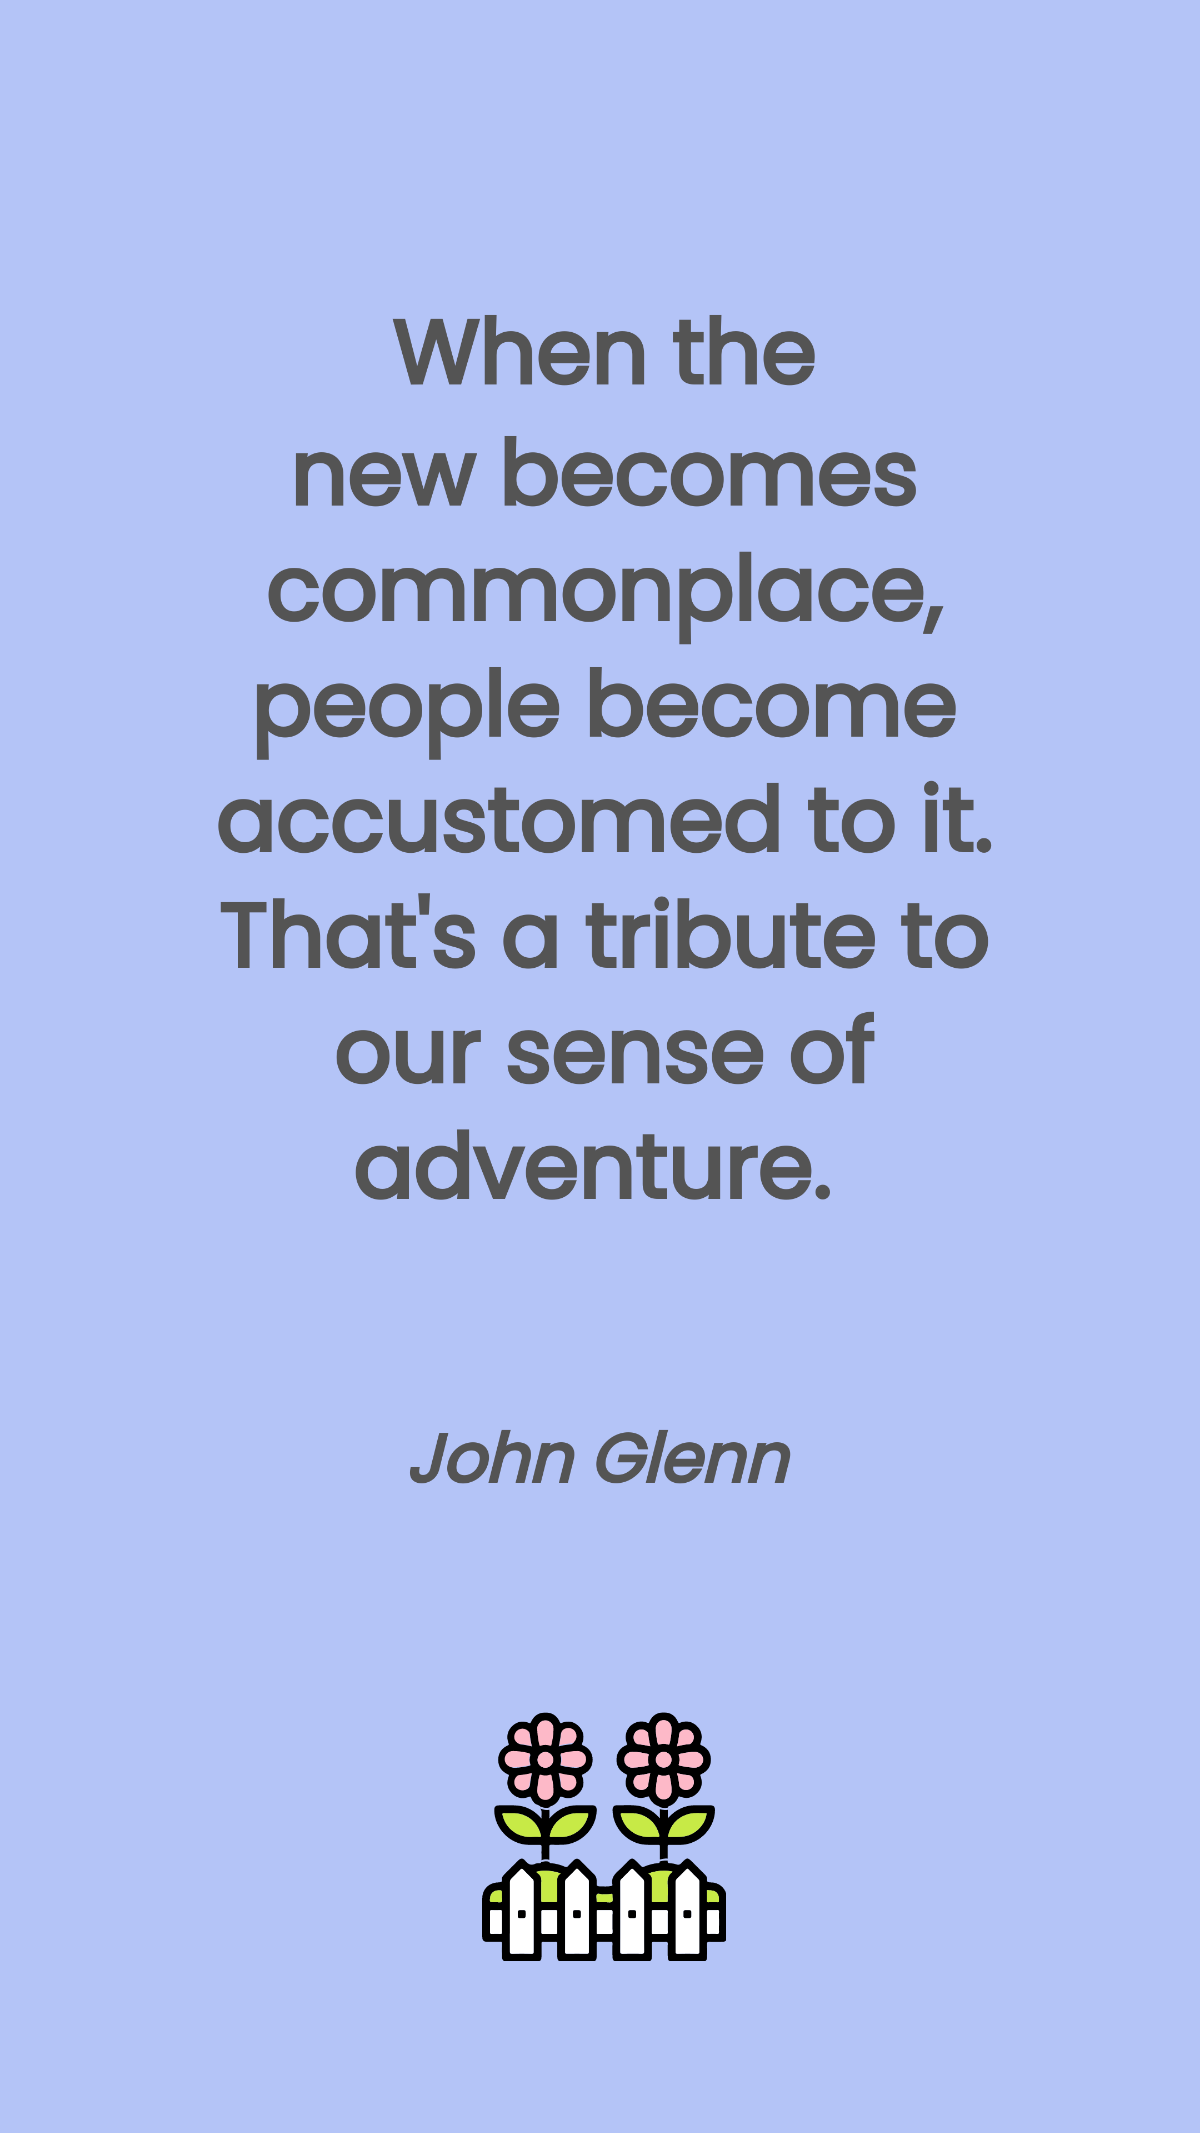 Free John Glenn - When the new becomes commonplace, people become accustomed to it. That's a tribute to our sense of adventure. Template